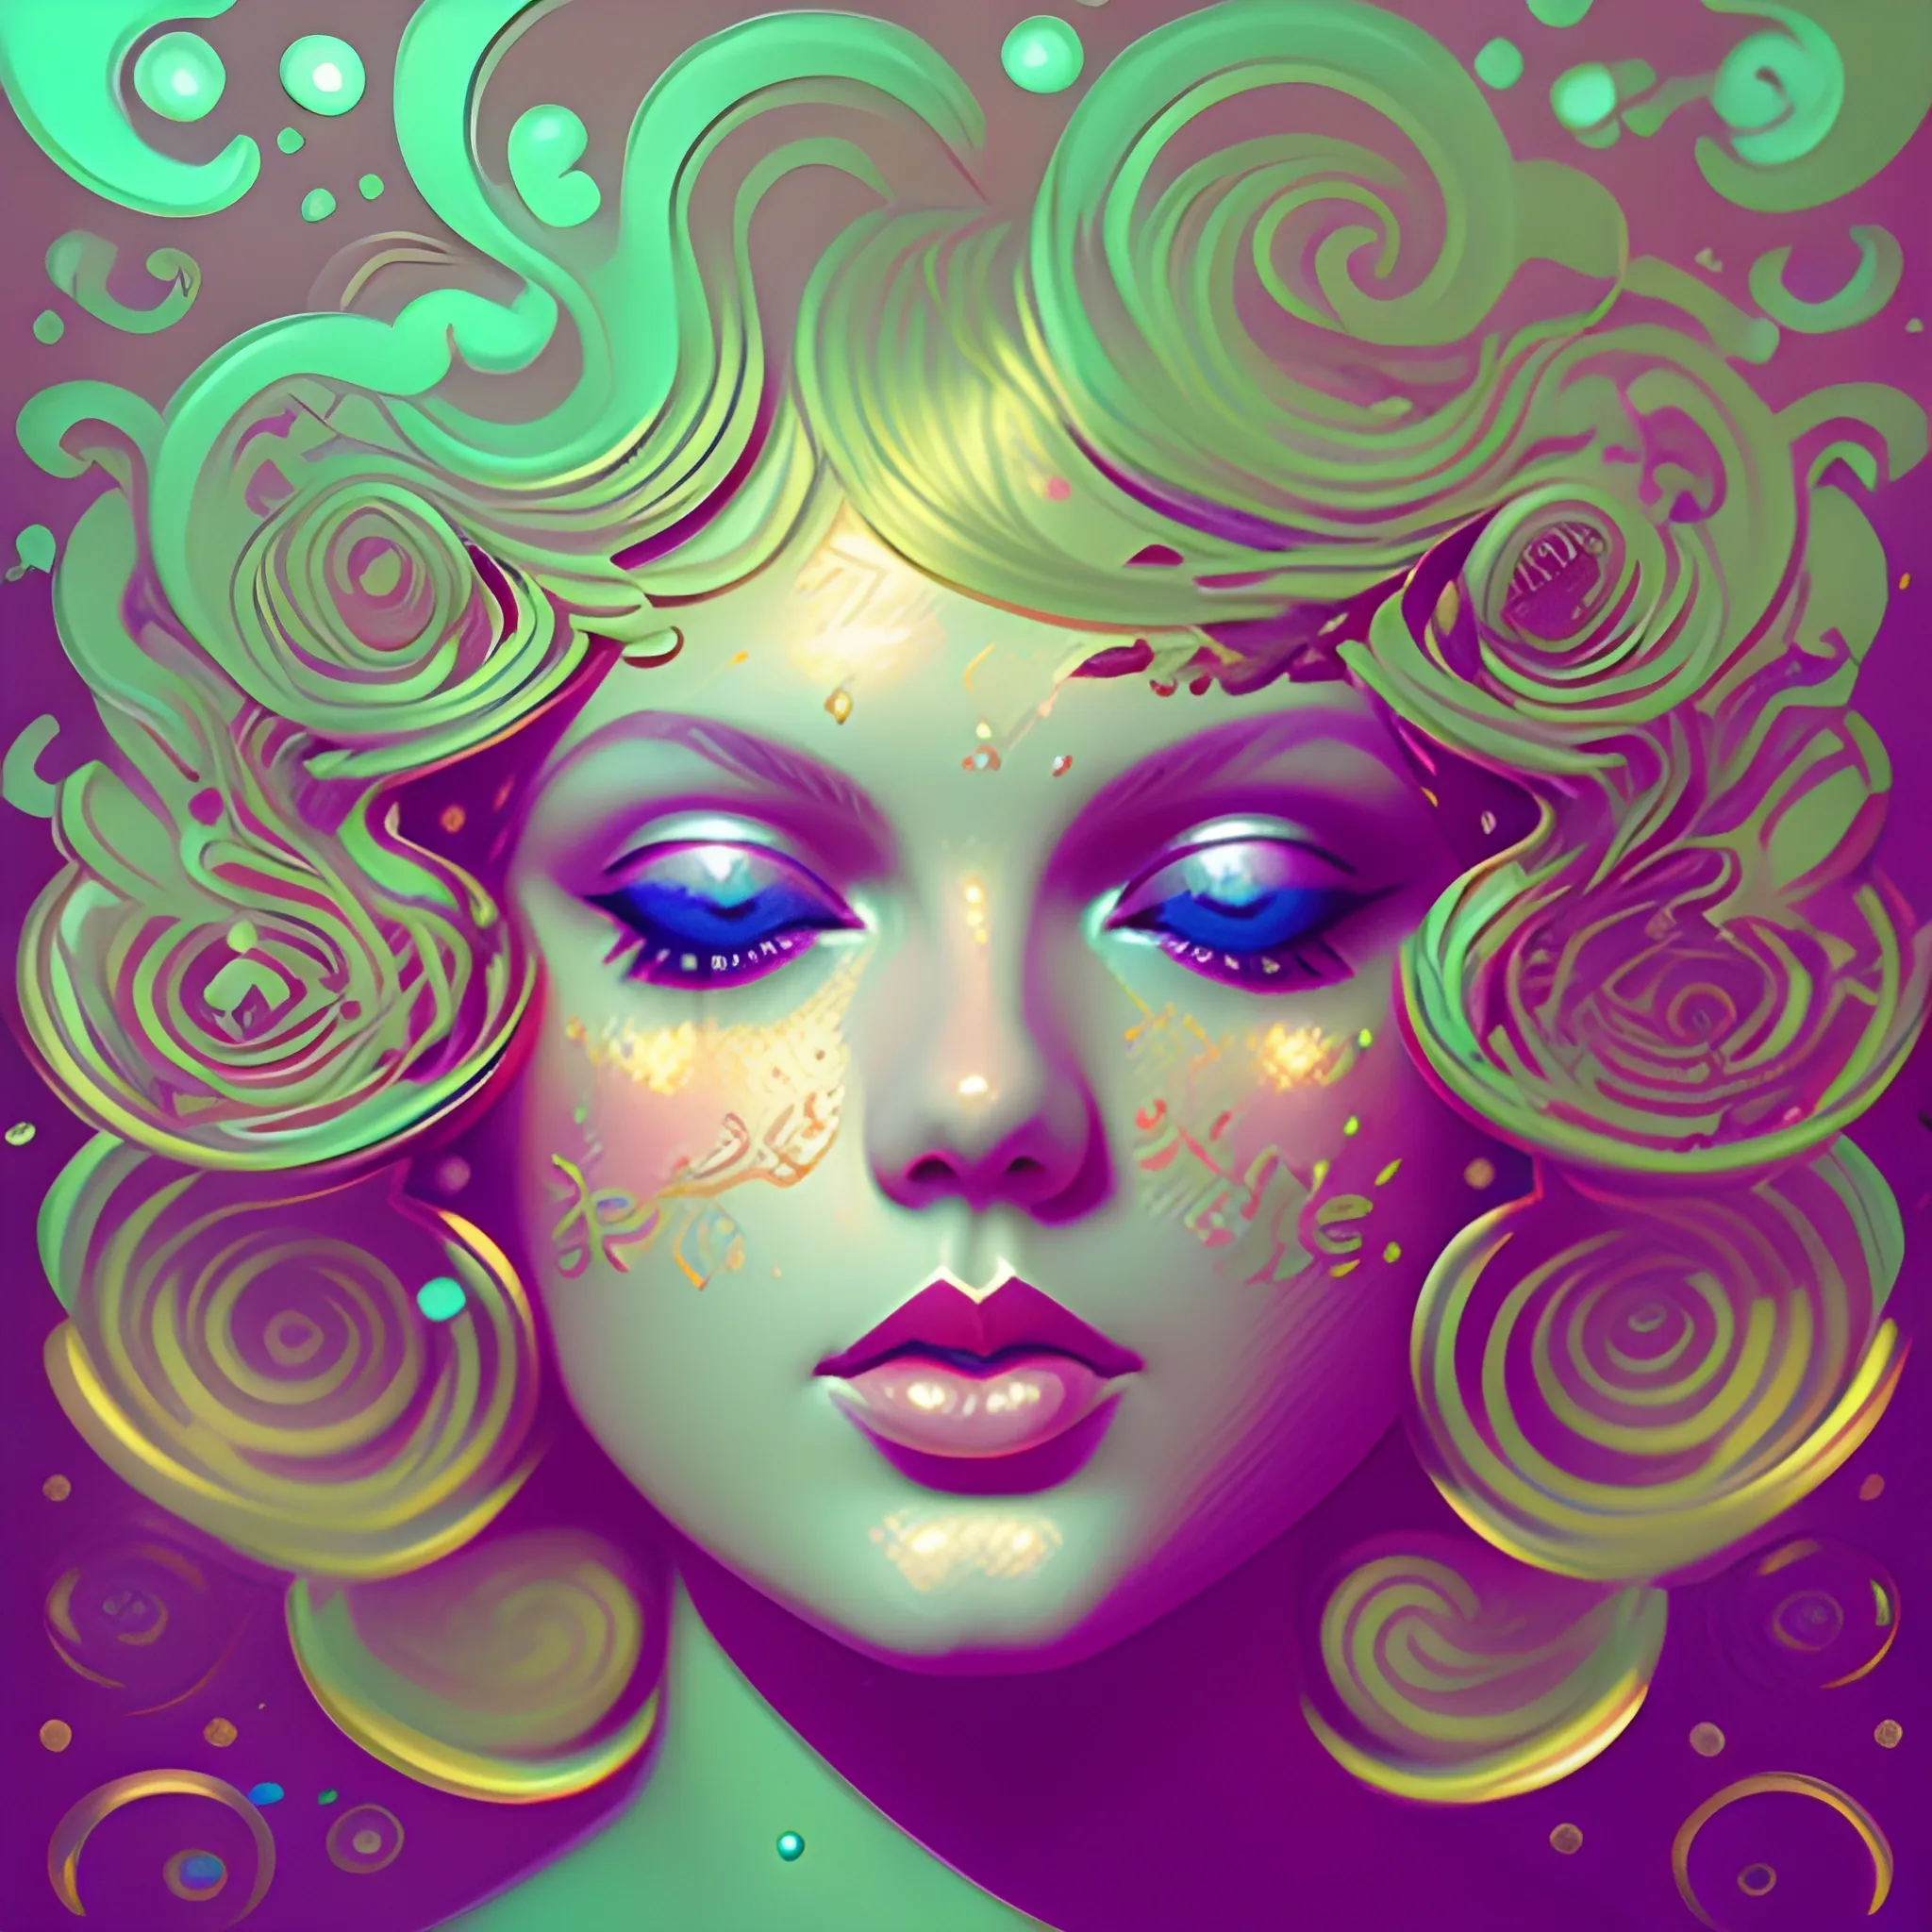 Flowery beautiful face like Taylor swift folklore era with gold jewellery, by petros afshar, ross tran, Tom Bagshaw, tom whalen, underwater bubbly psychedelic clouds, Anaglyph 3D lens blur effect